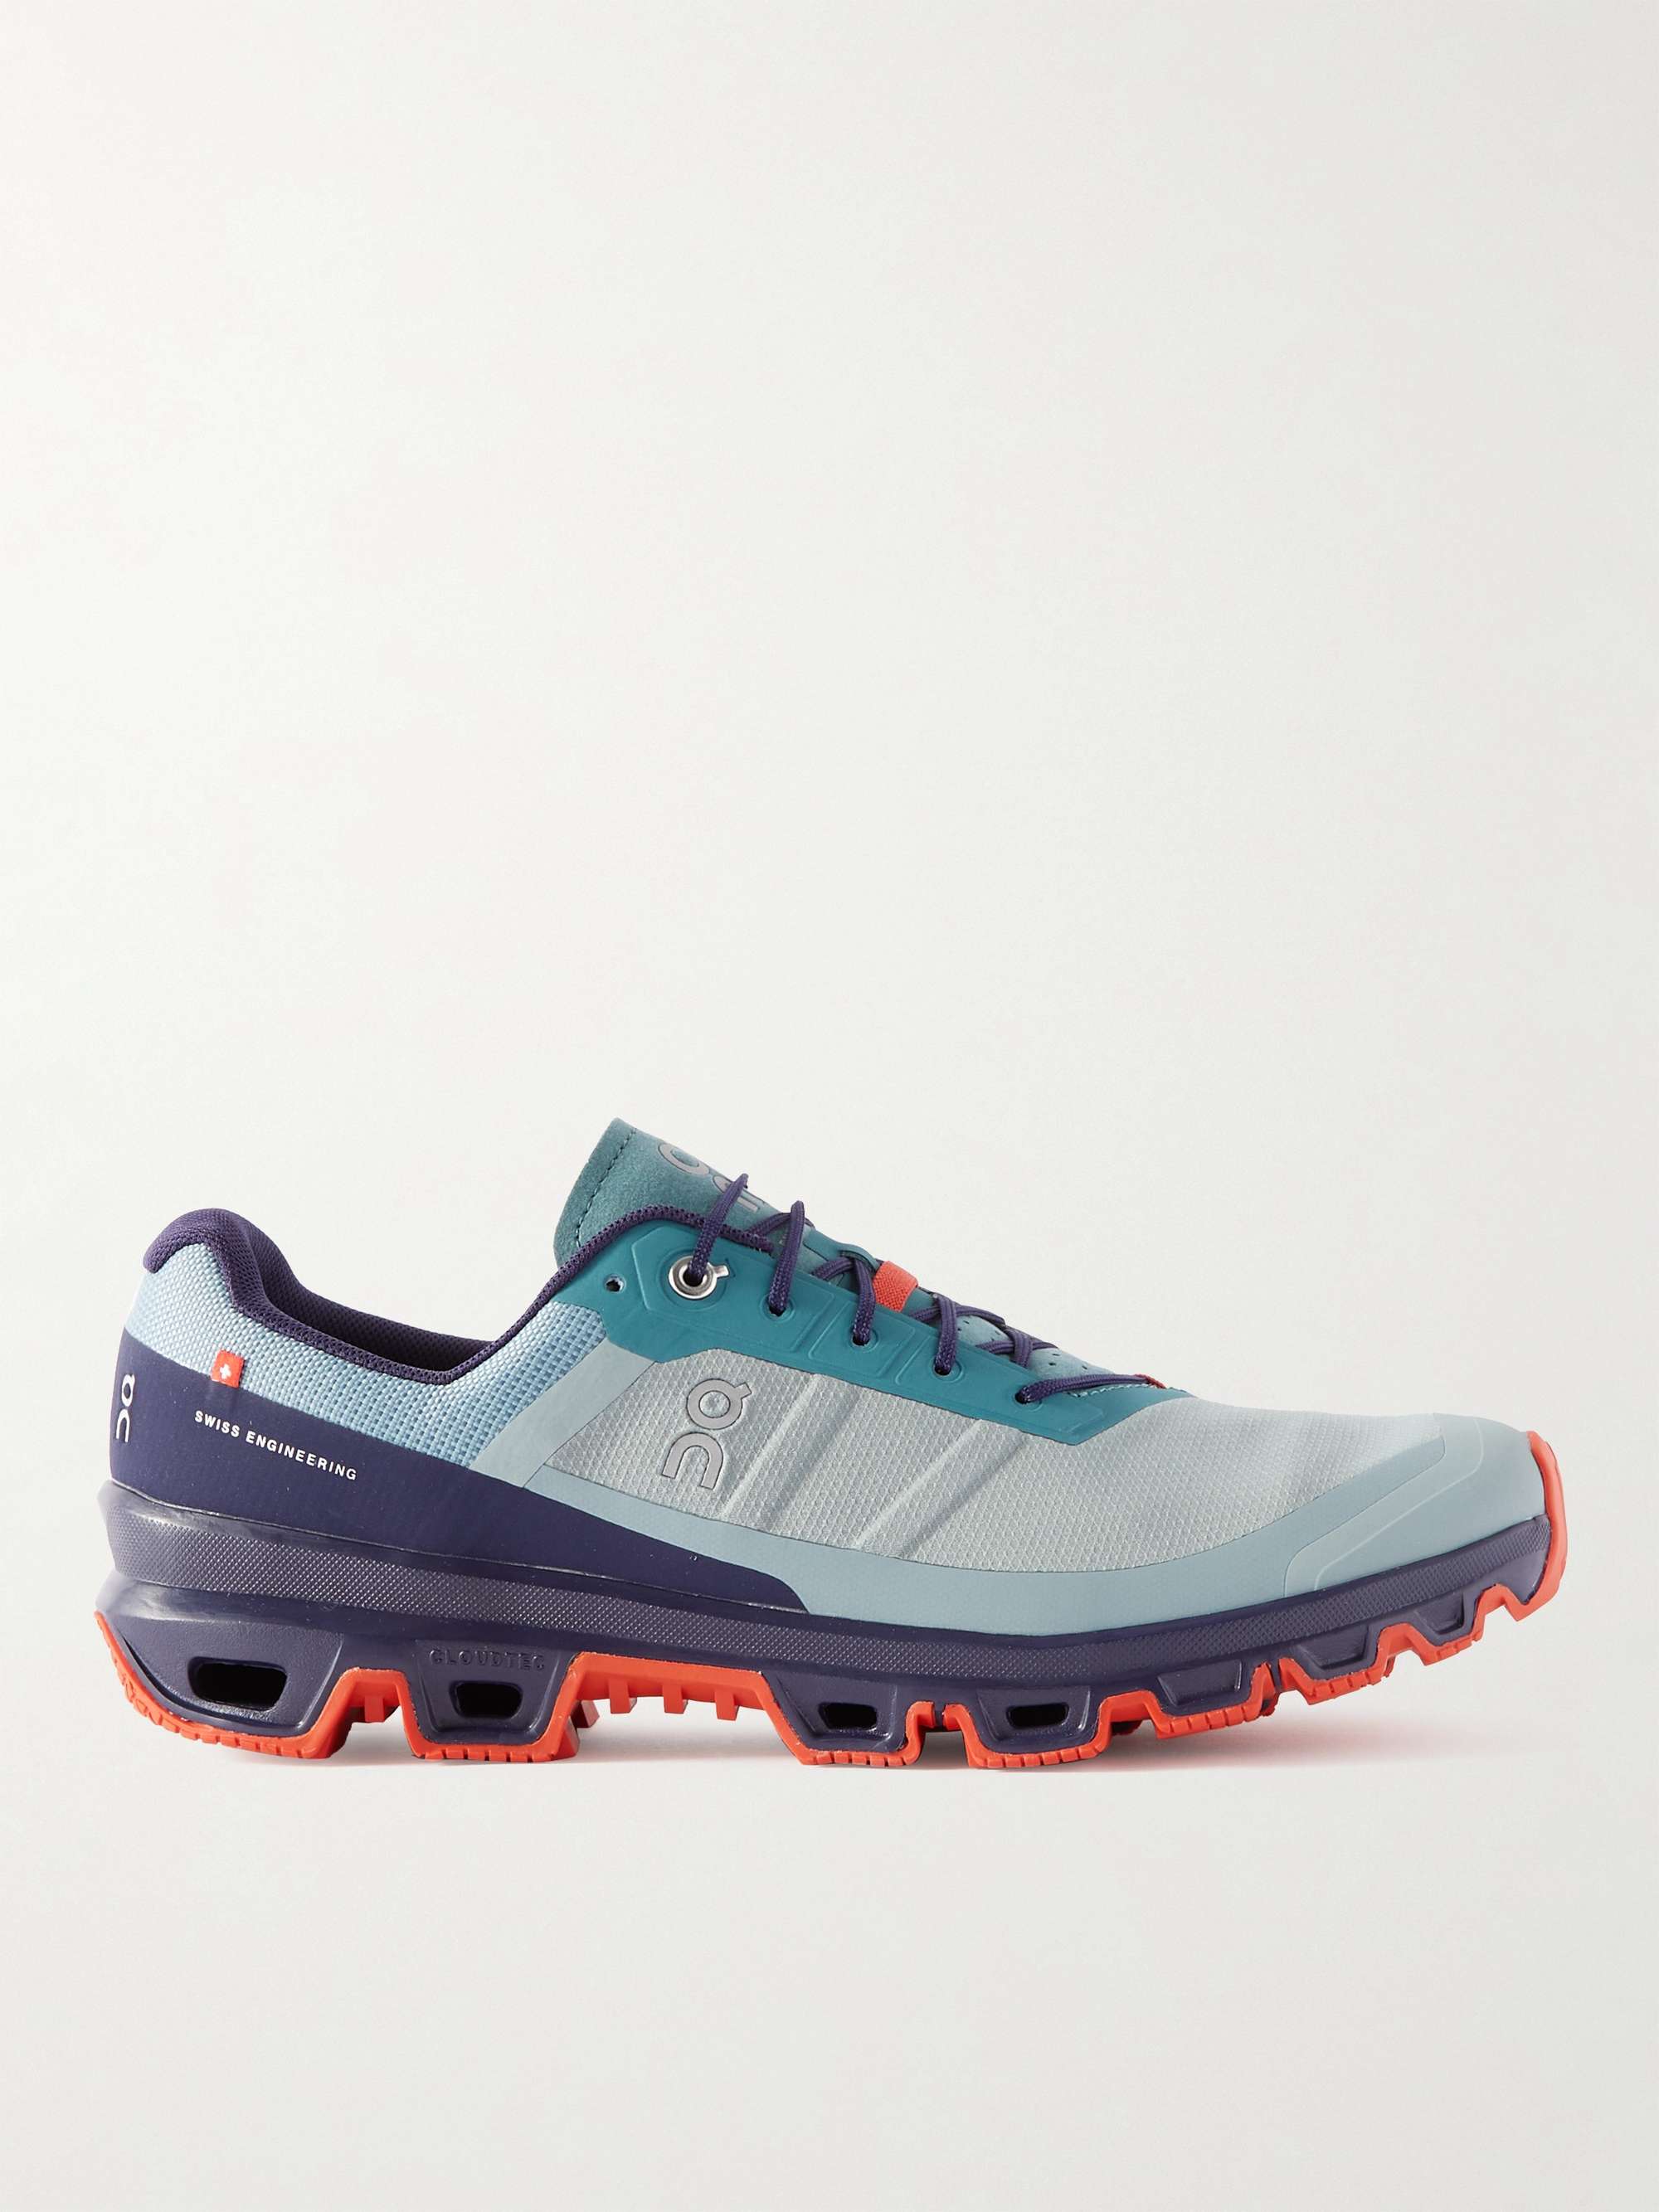 ON Cloudstratus Rubber-Trimmed Recycled Mesh Running Sneakers